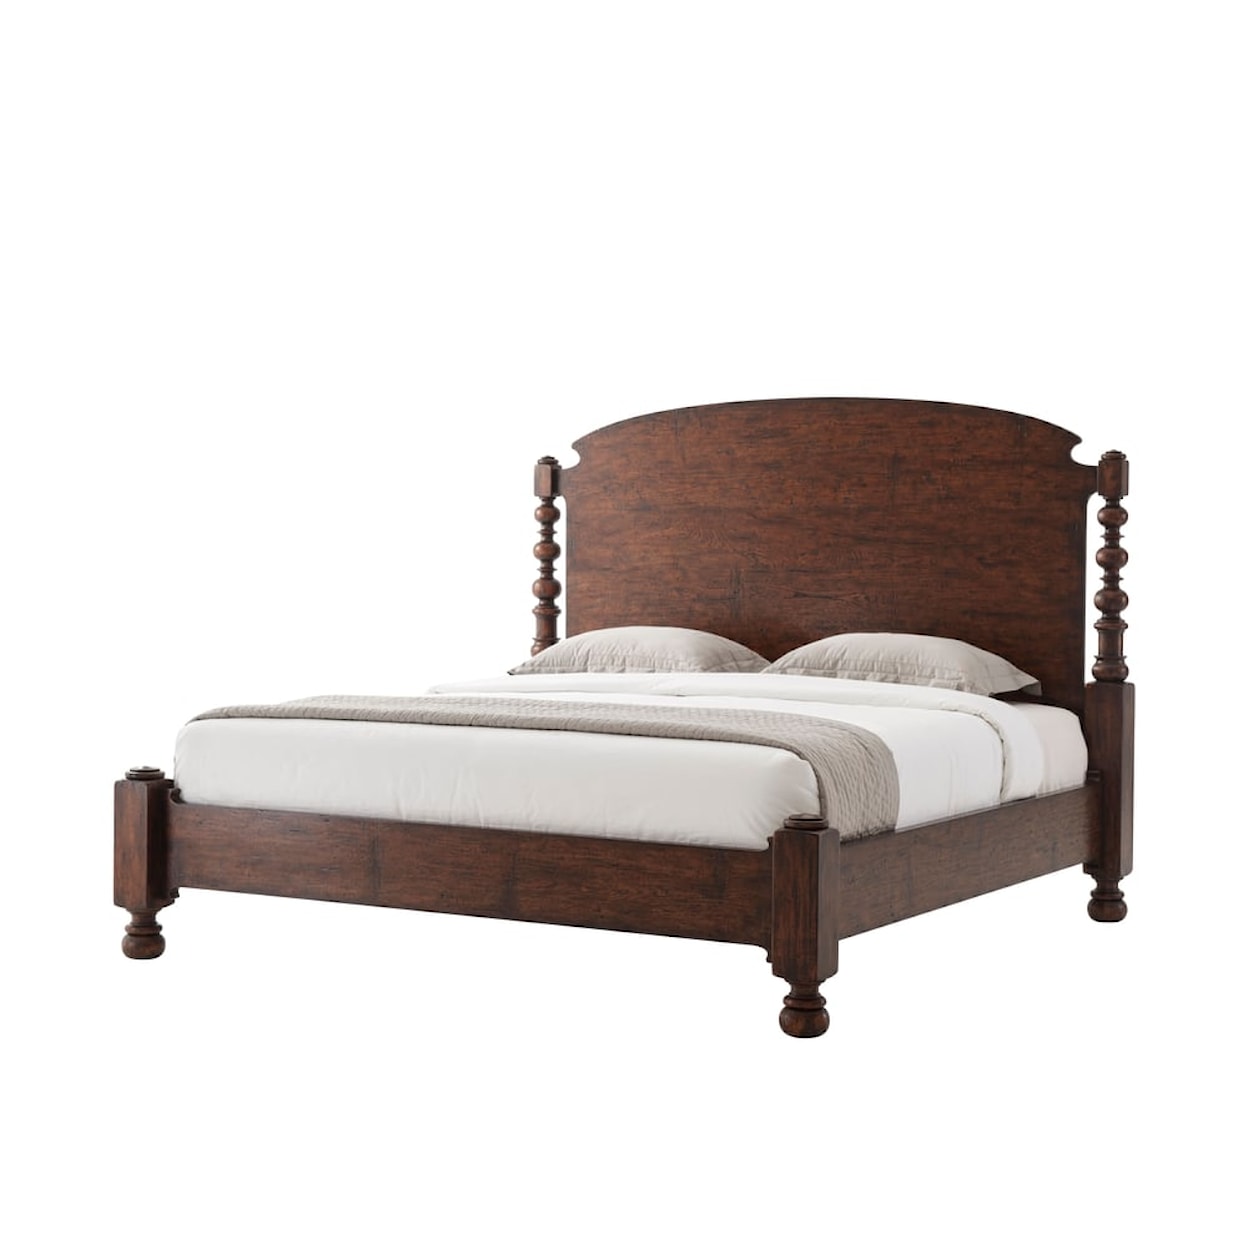 Theodore Alexander Naseby King Bed